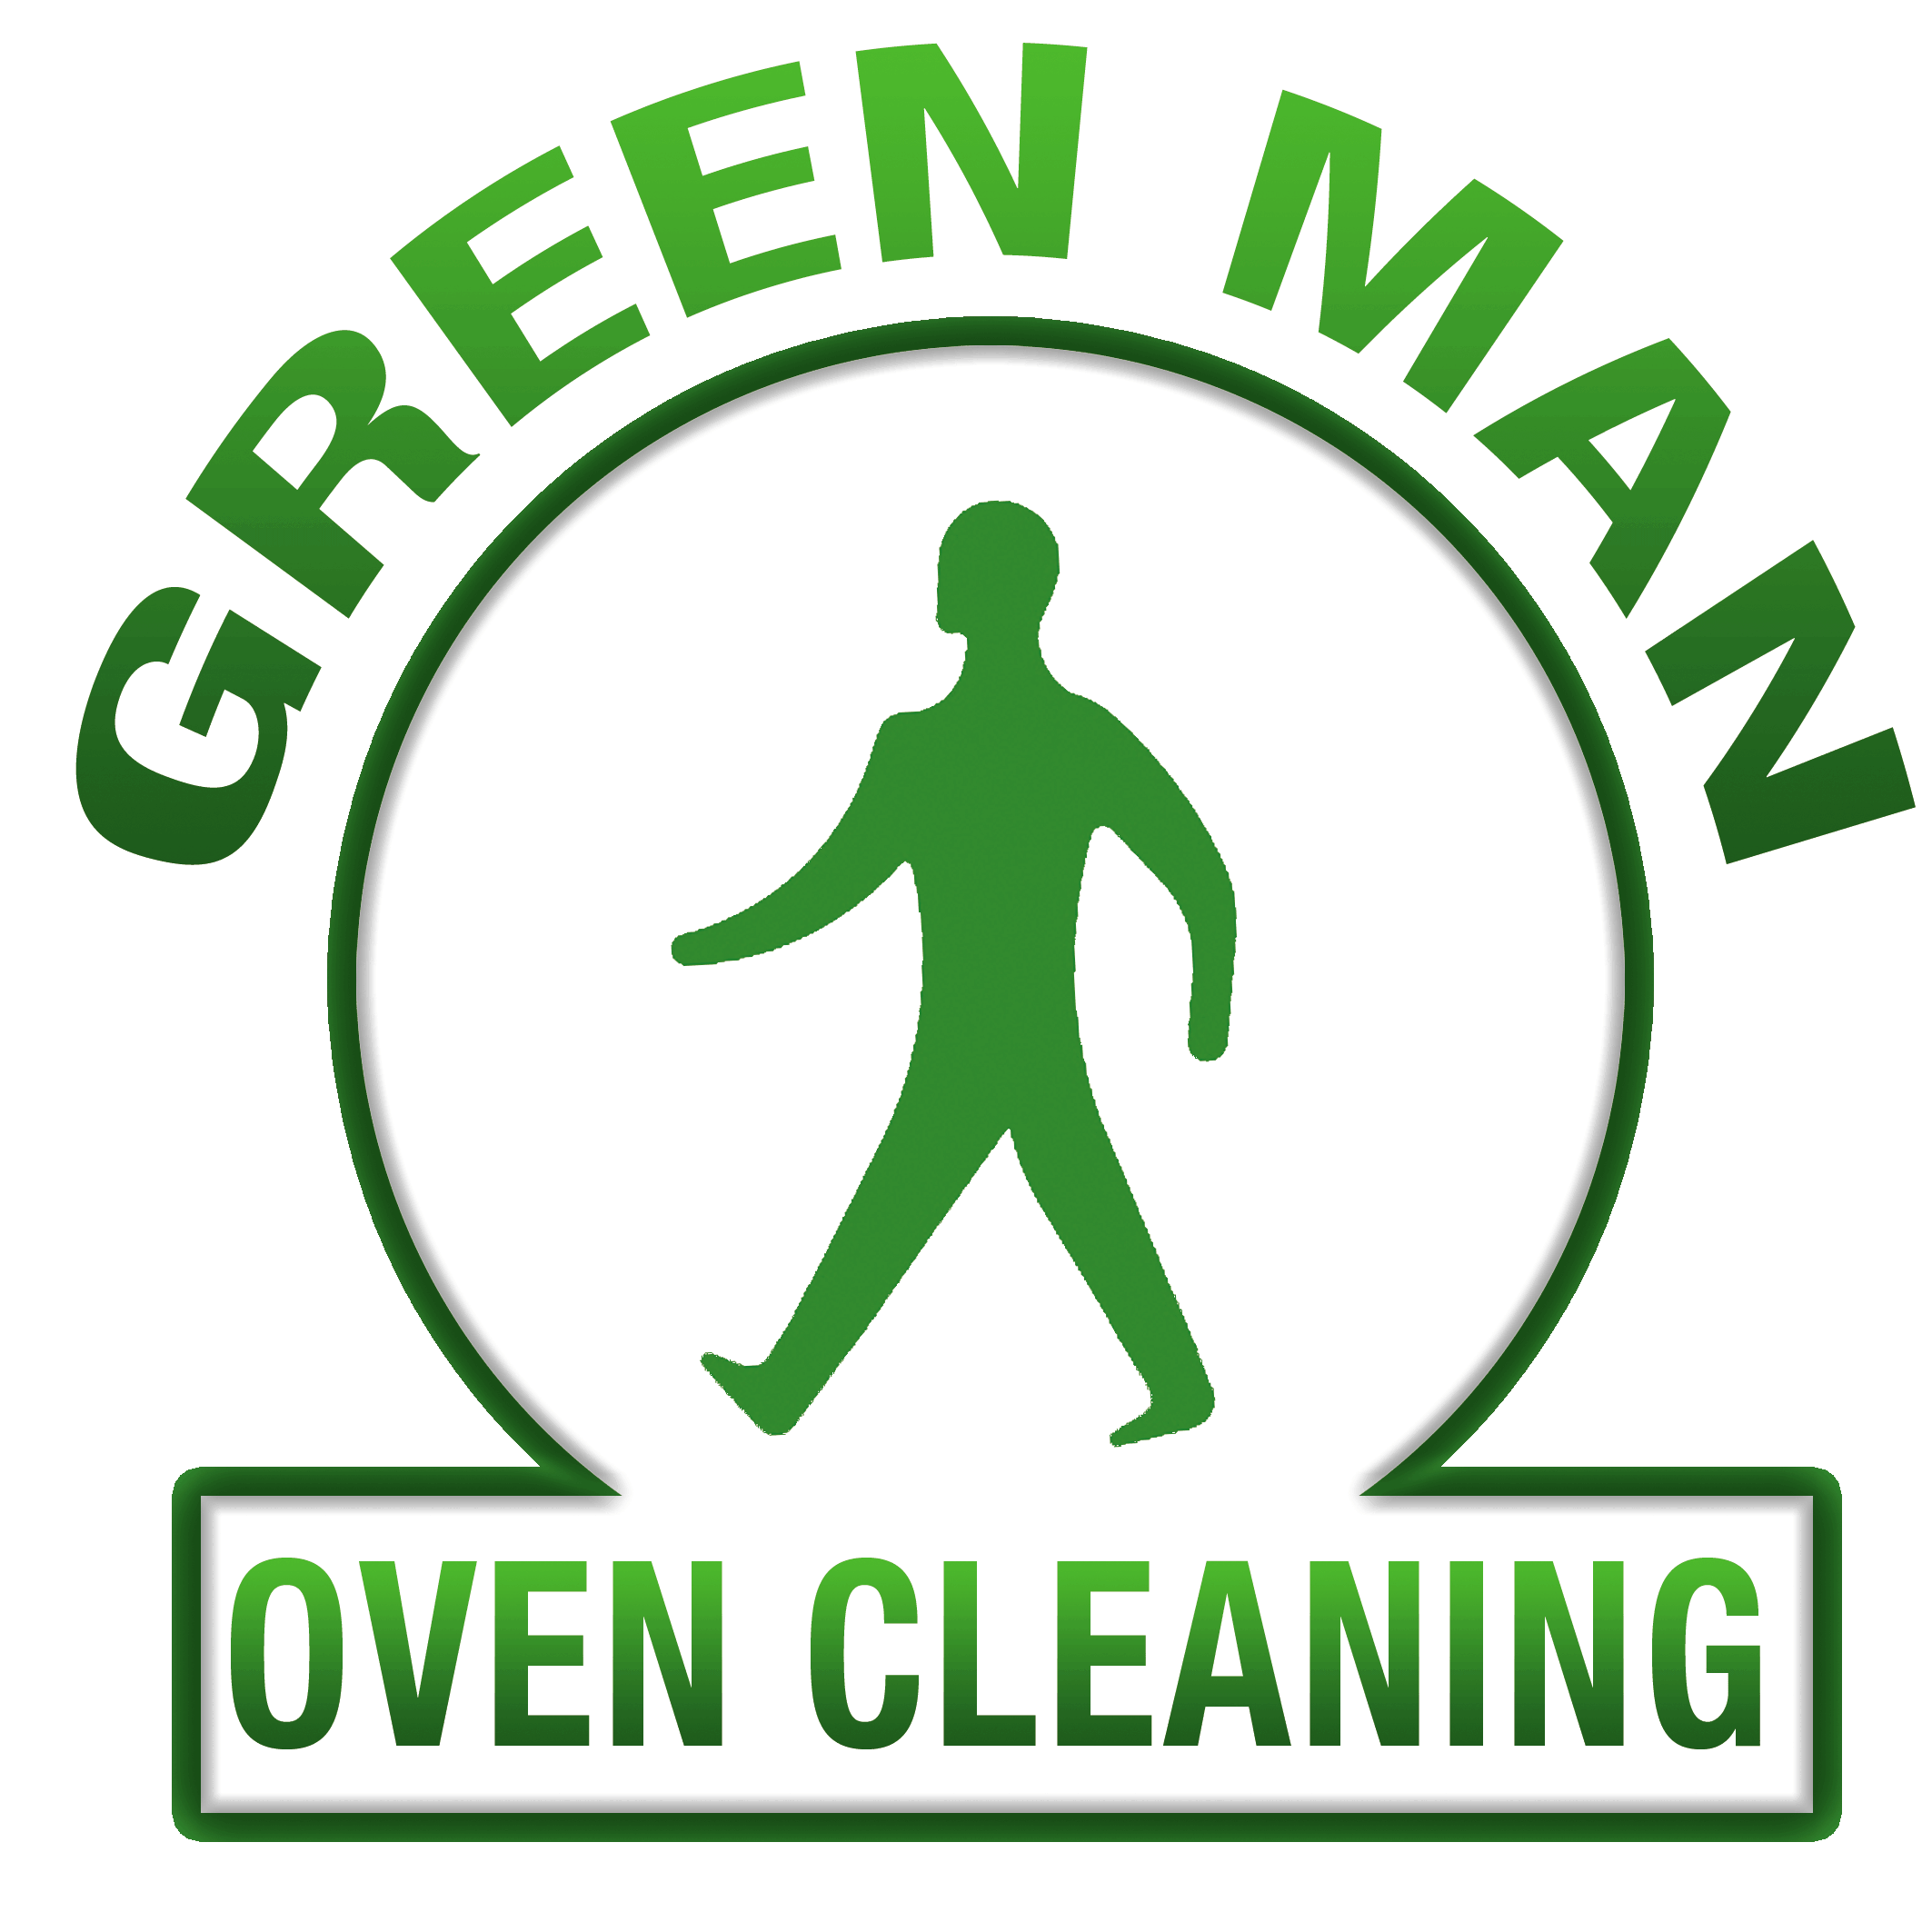 Green Man Logo - Green Man Oven Cleaning - Restore your oven, hob, microwave or BBQ ...